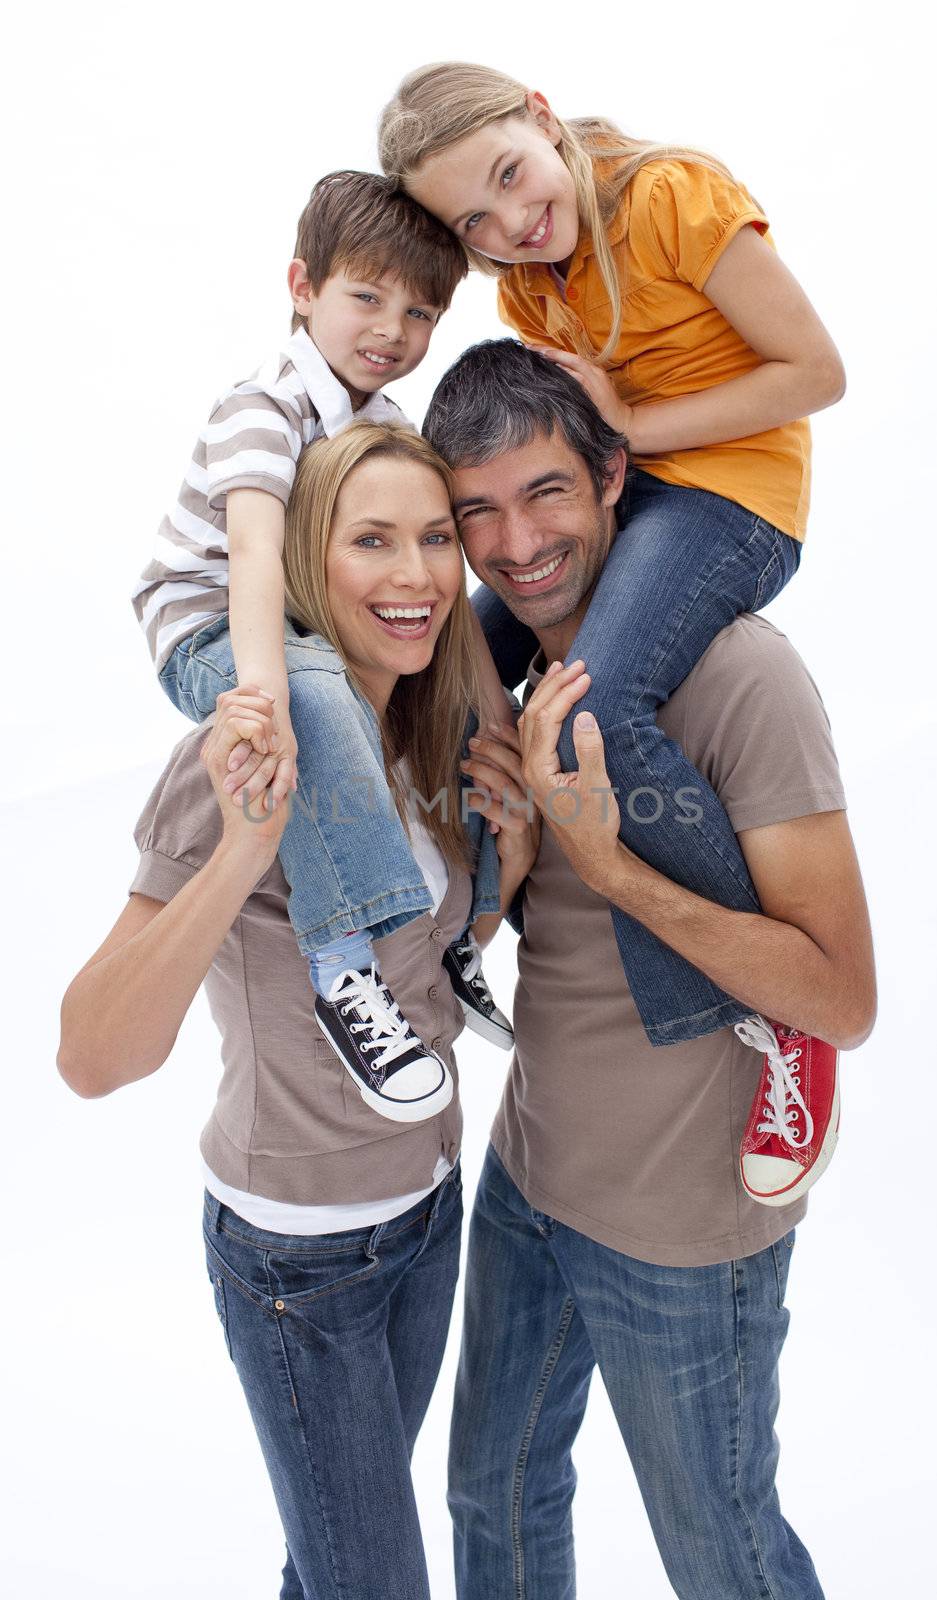 Mother and father giving children piggy back ride against white background